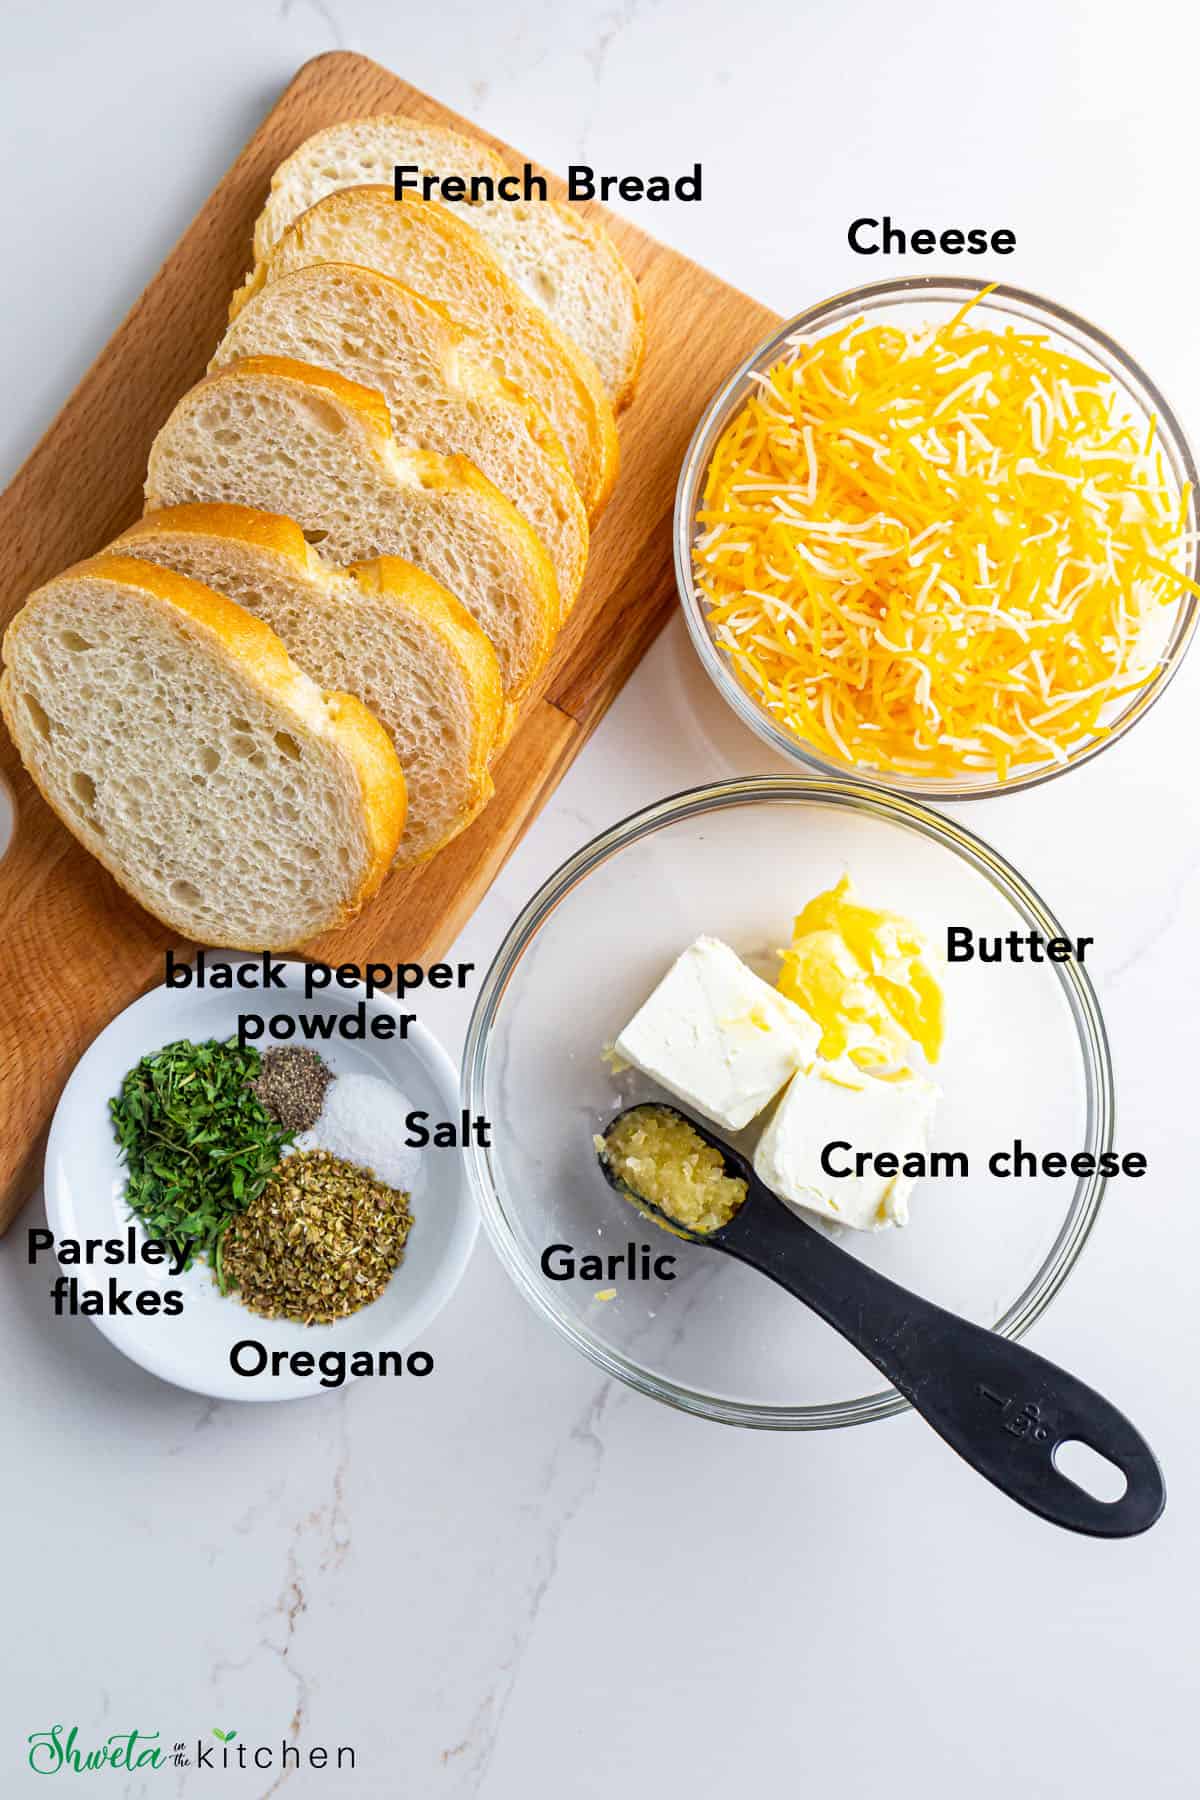 Ingredients for Air-fryer Garlic Bread laid out on white surface